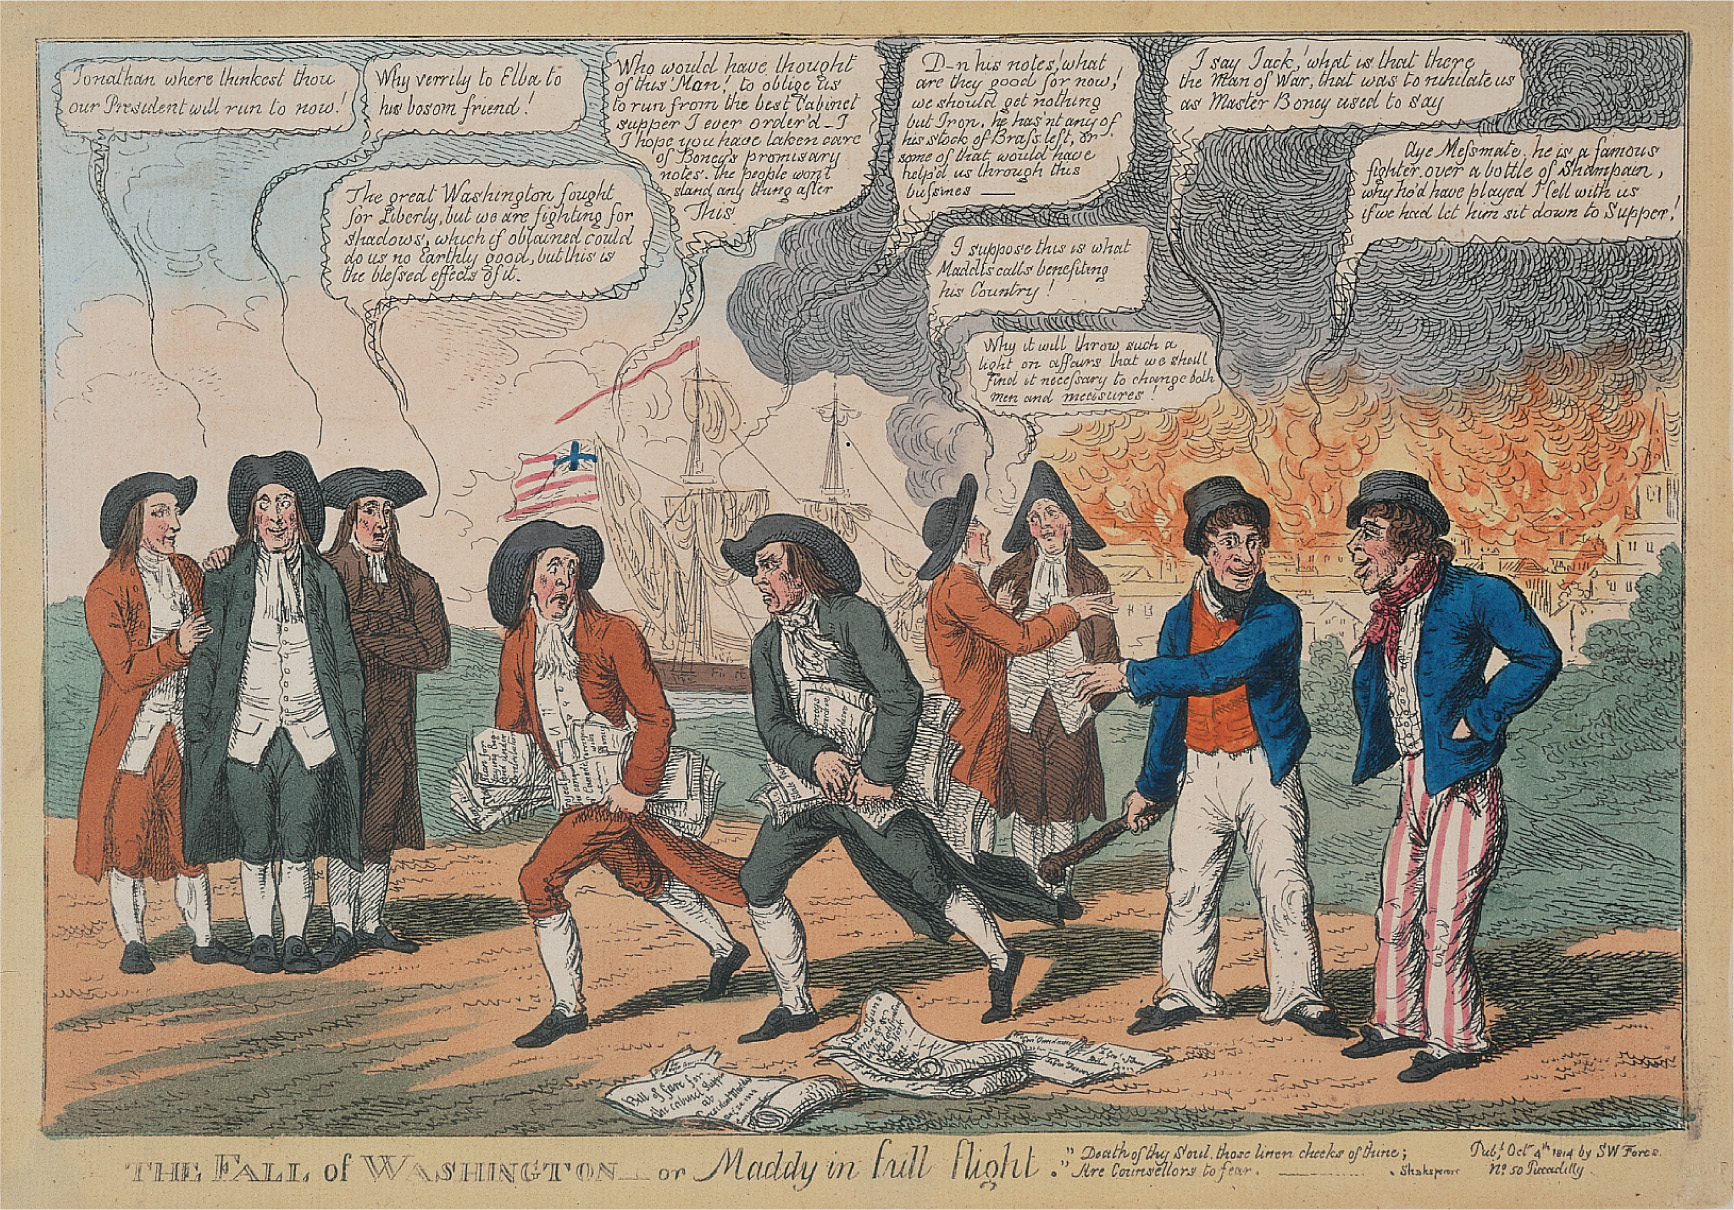 A political cartoon shows men carrying papers as they run
from a burning city.